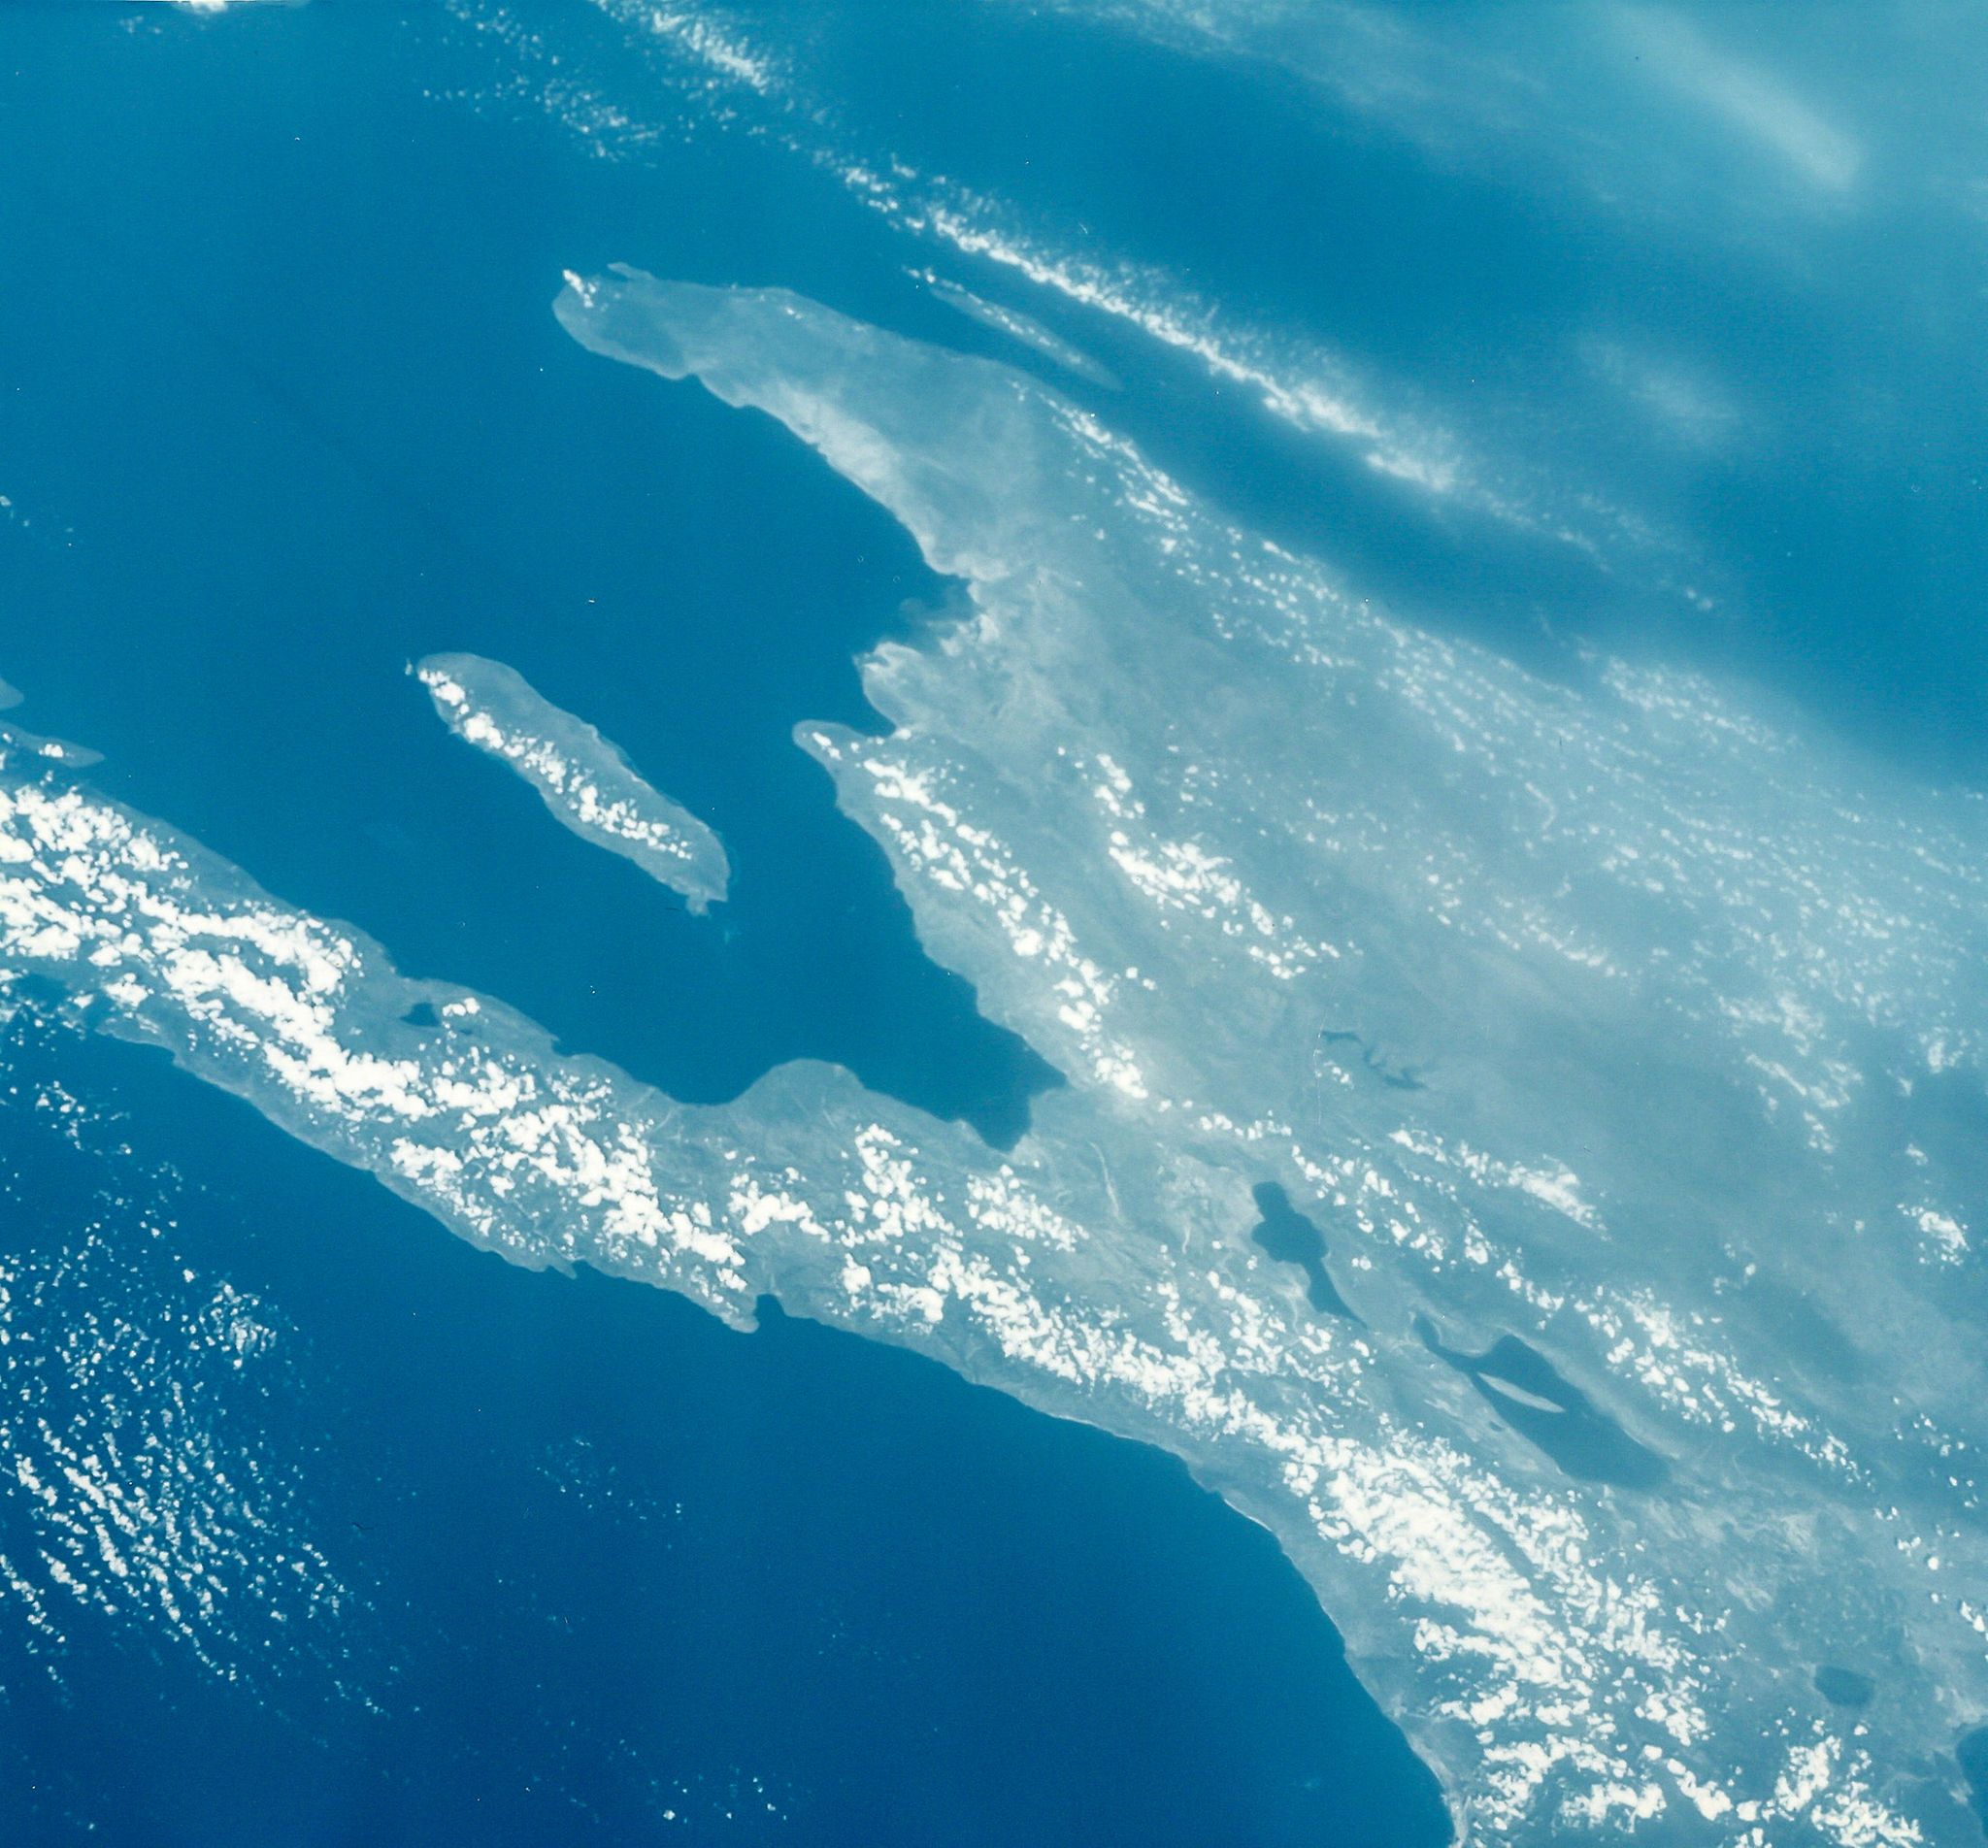 Haïti and the Bahamas in the Caribbean seen from Space, Gemini 7, December 1965 Two vintage - Image 2 of 2